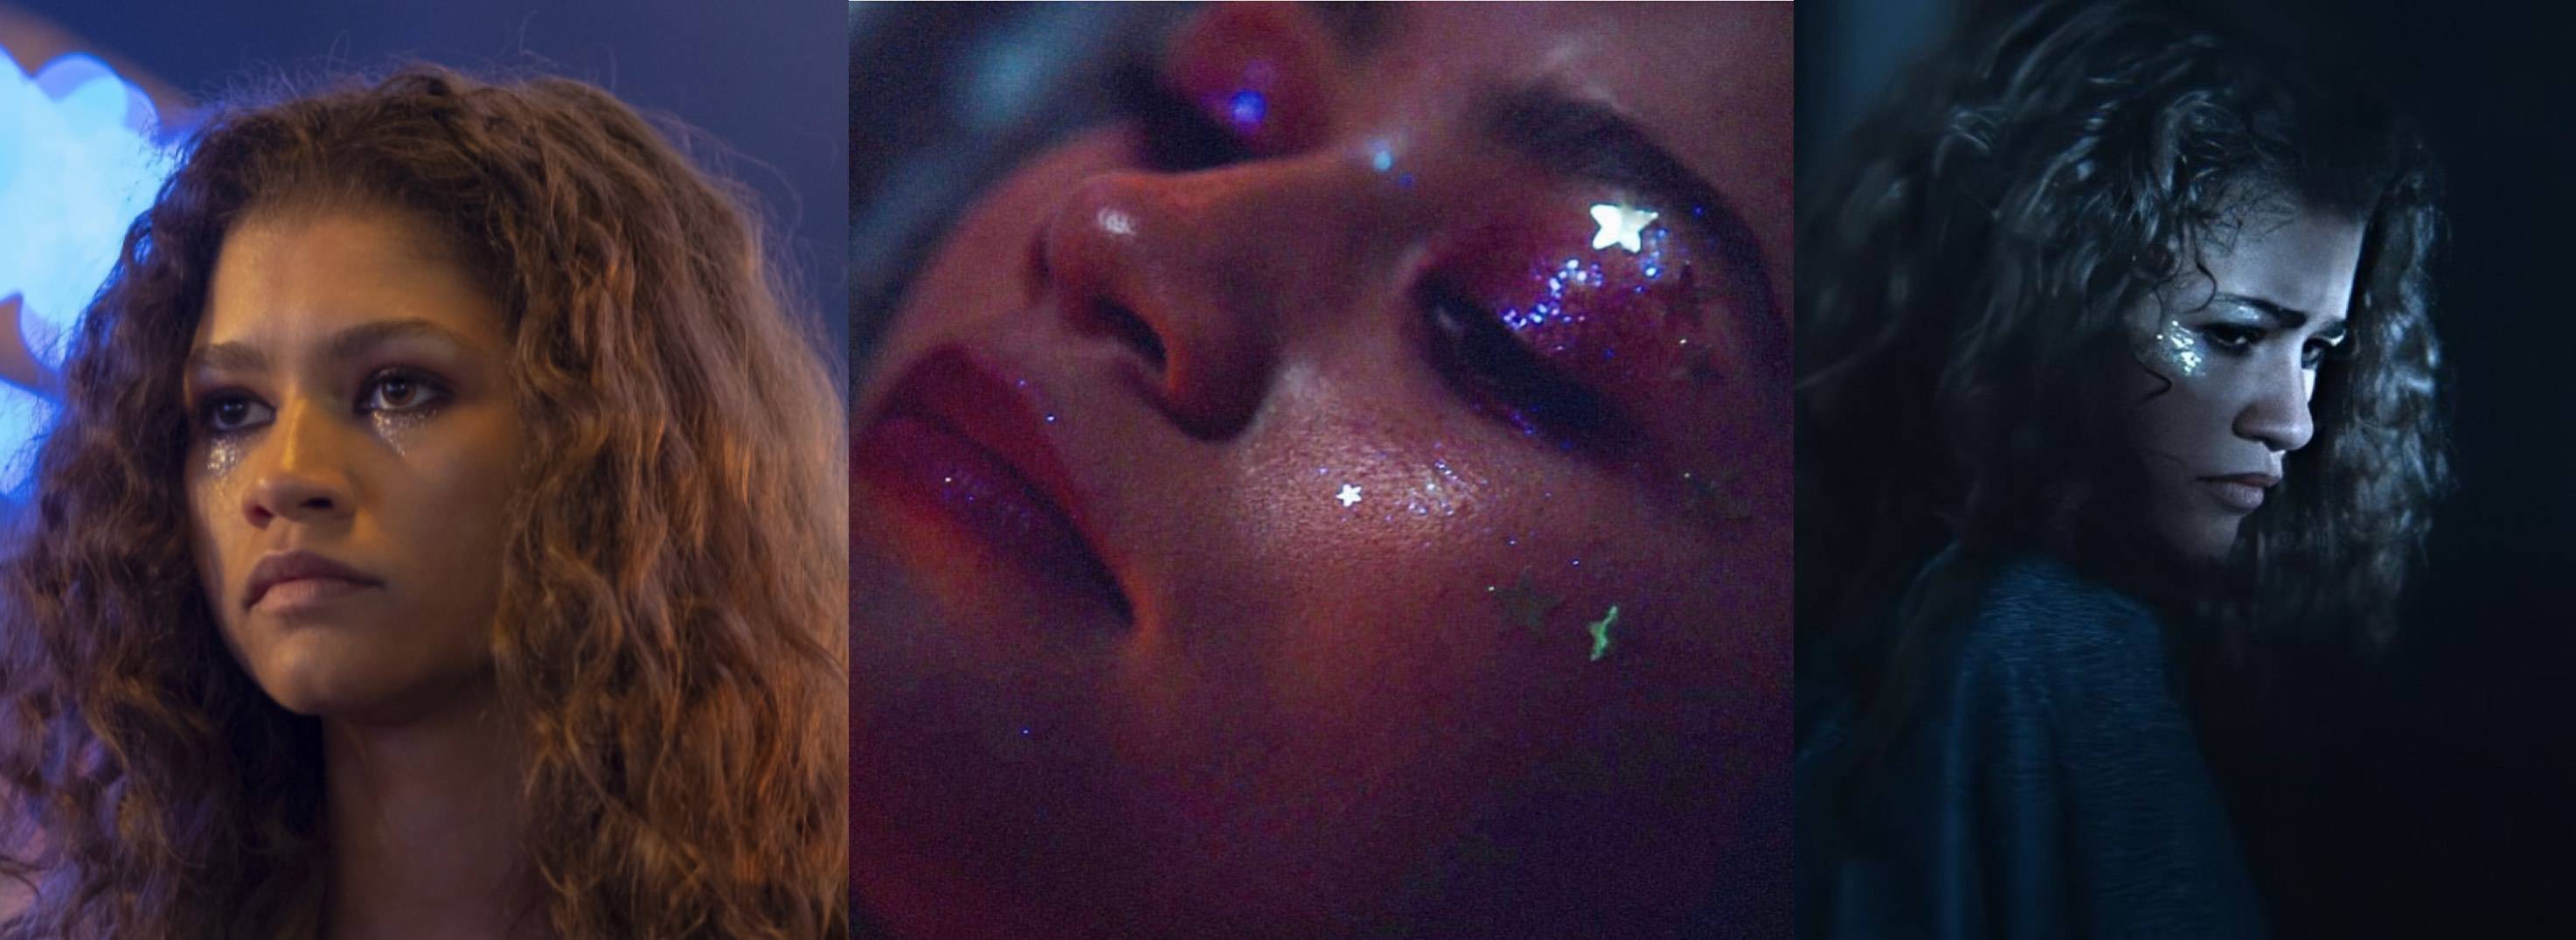 5 Makeup Products To Use To Master The Looks From 'Euphoria